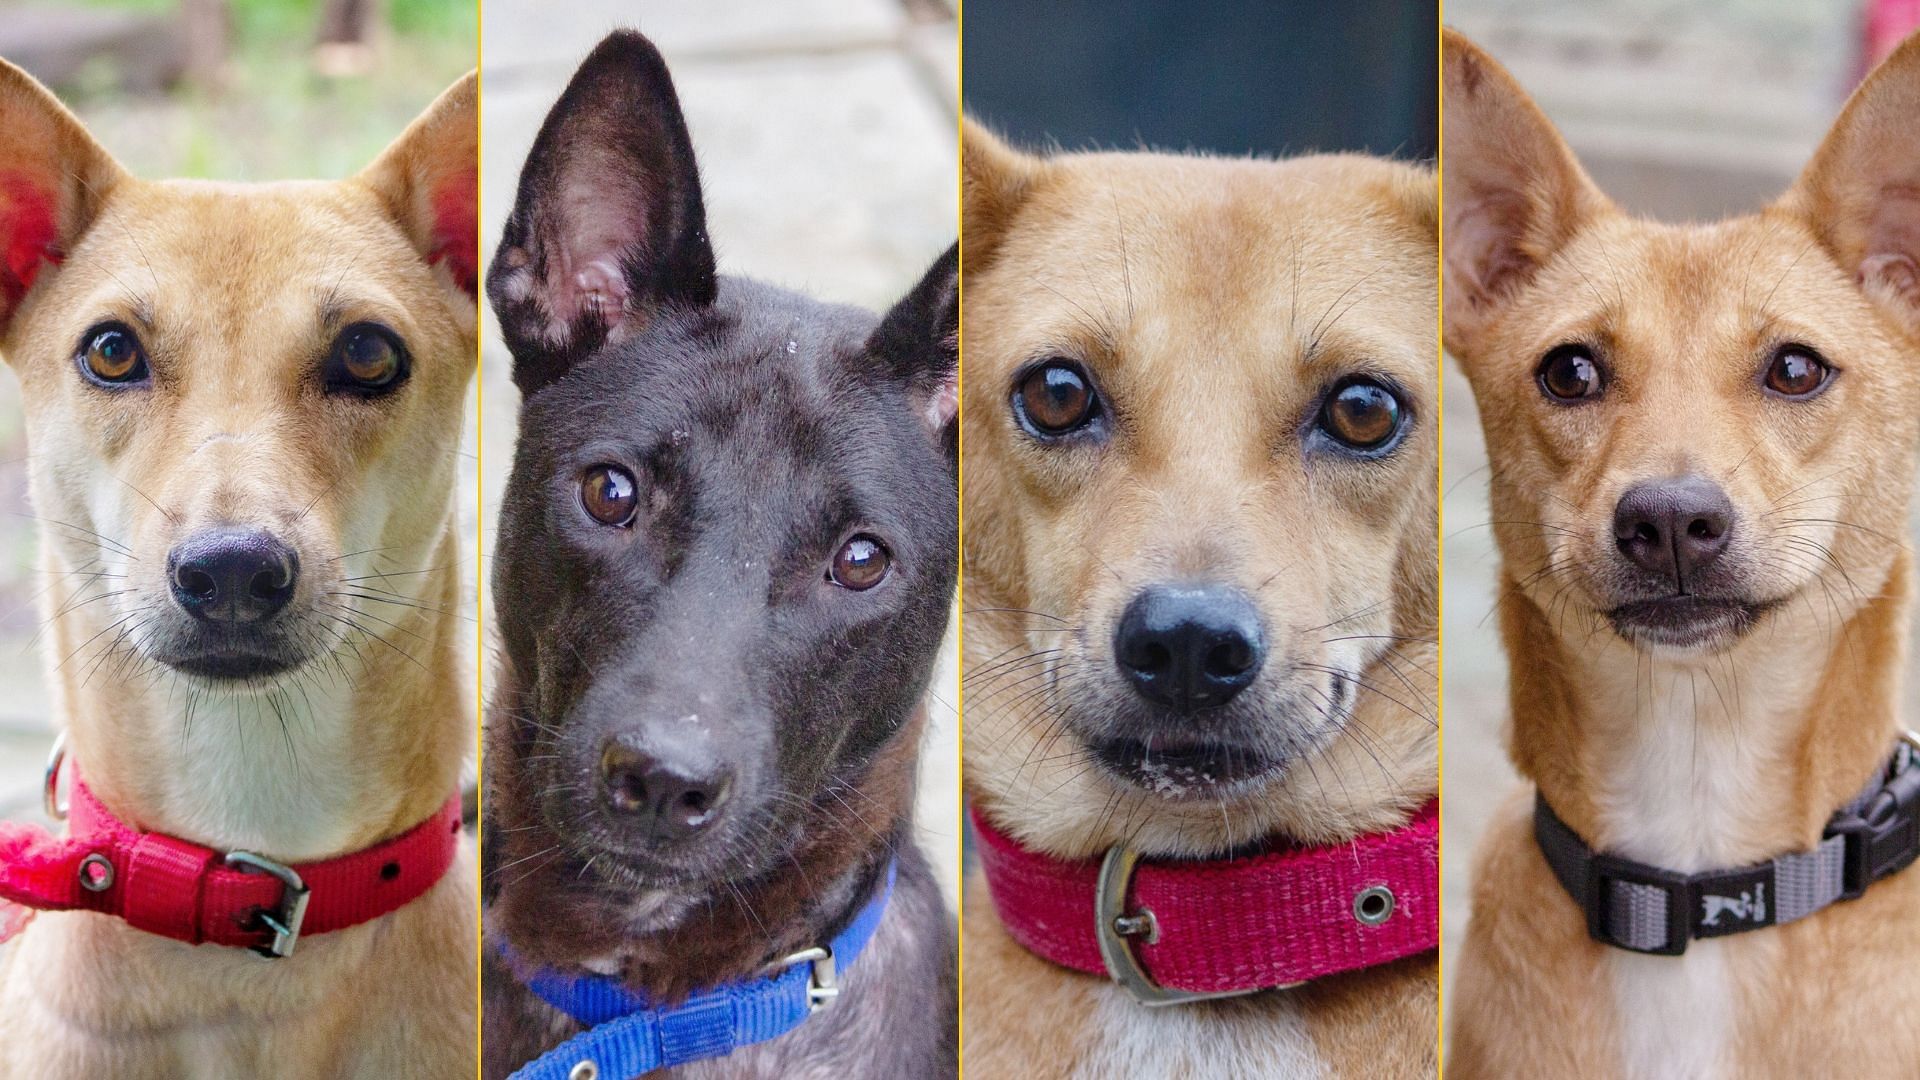 After a traumatic past, a grand escape, over 15 dogs are still awaiting a happy home.